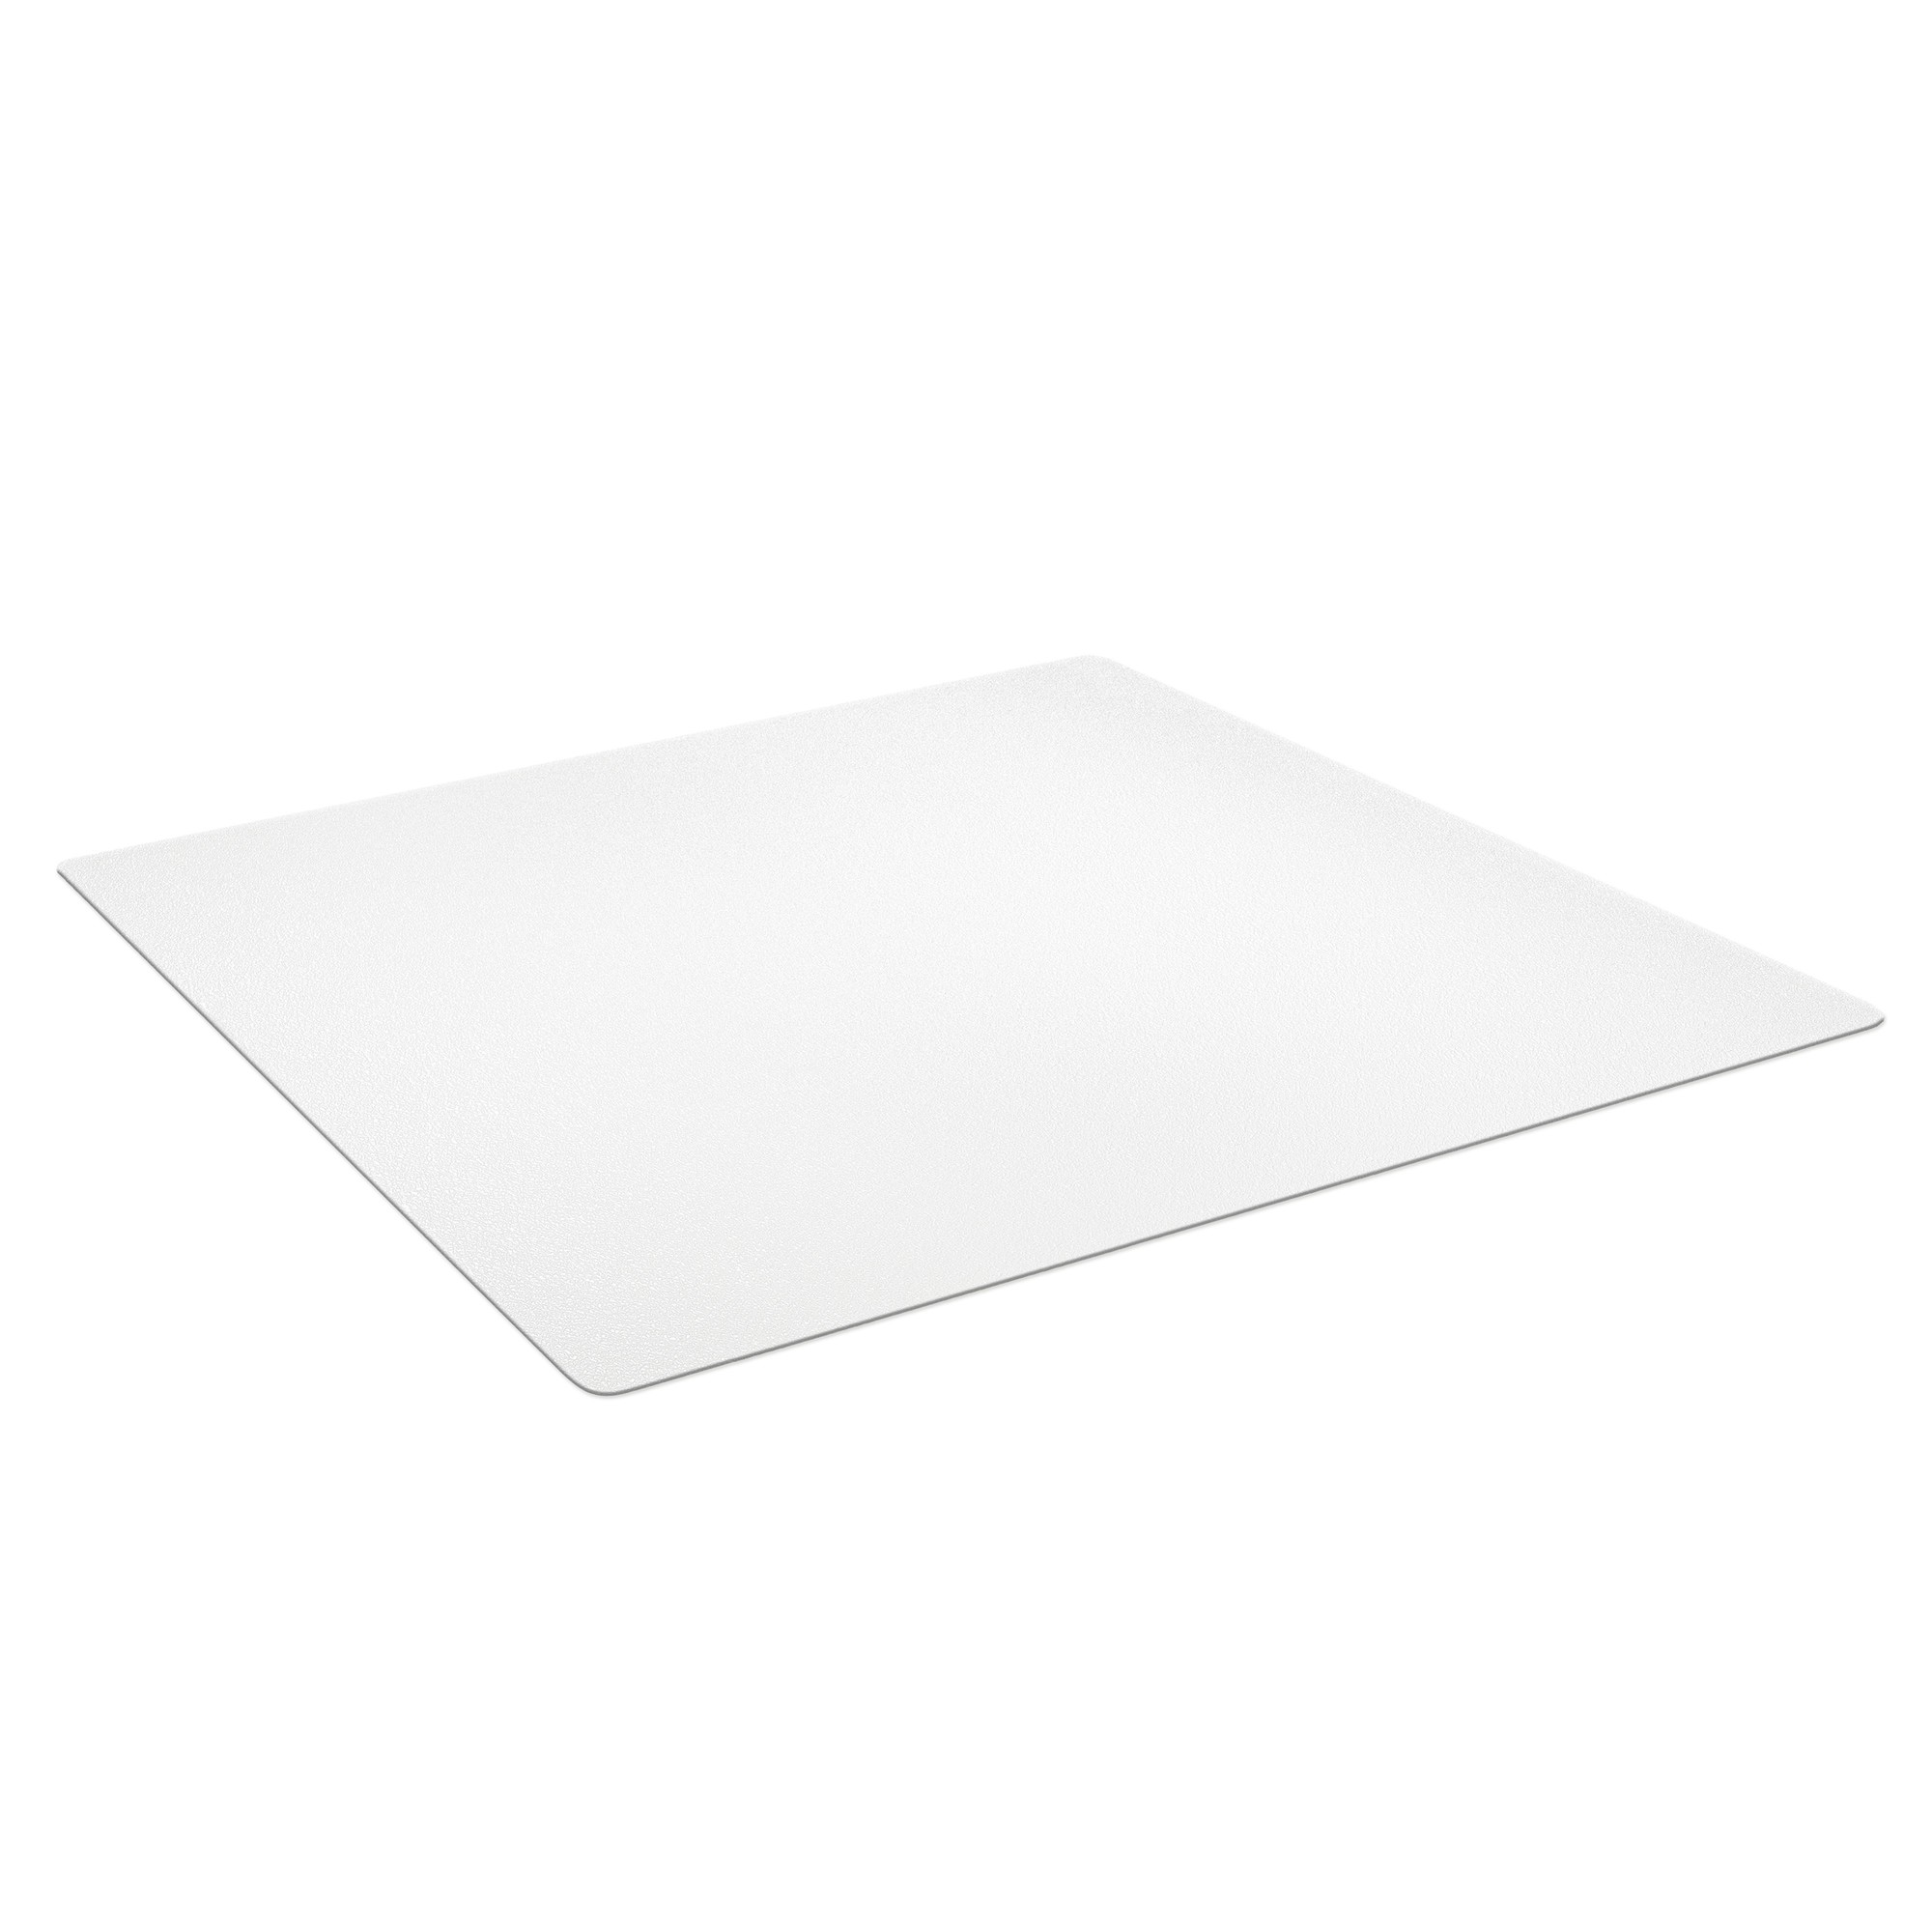 Aleco ES Robbins, Chair Mat for Heavy Use on HF, 46Inchx60Inch, Length 60 in, Width 46 in, Material Vinyl, Model 132331